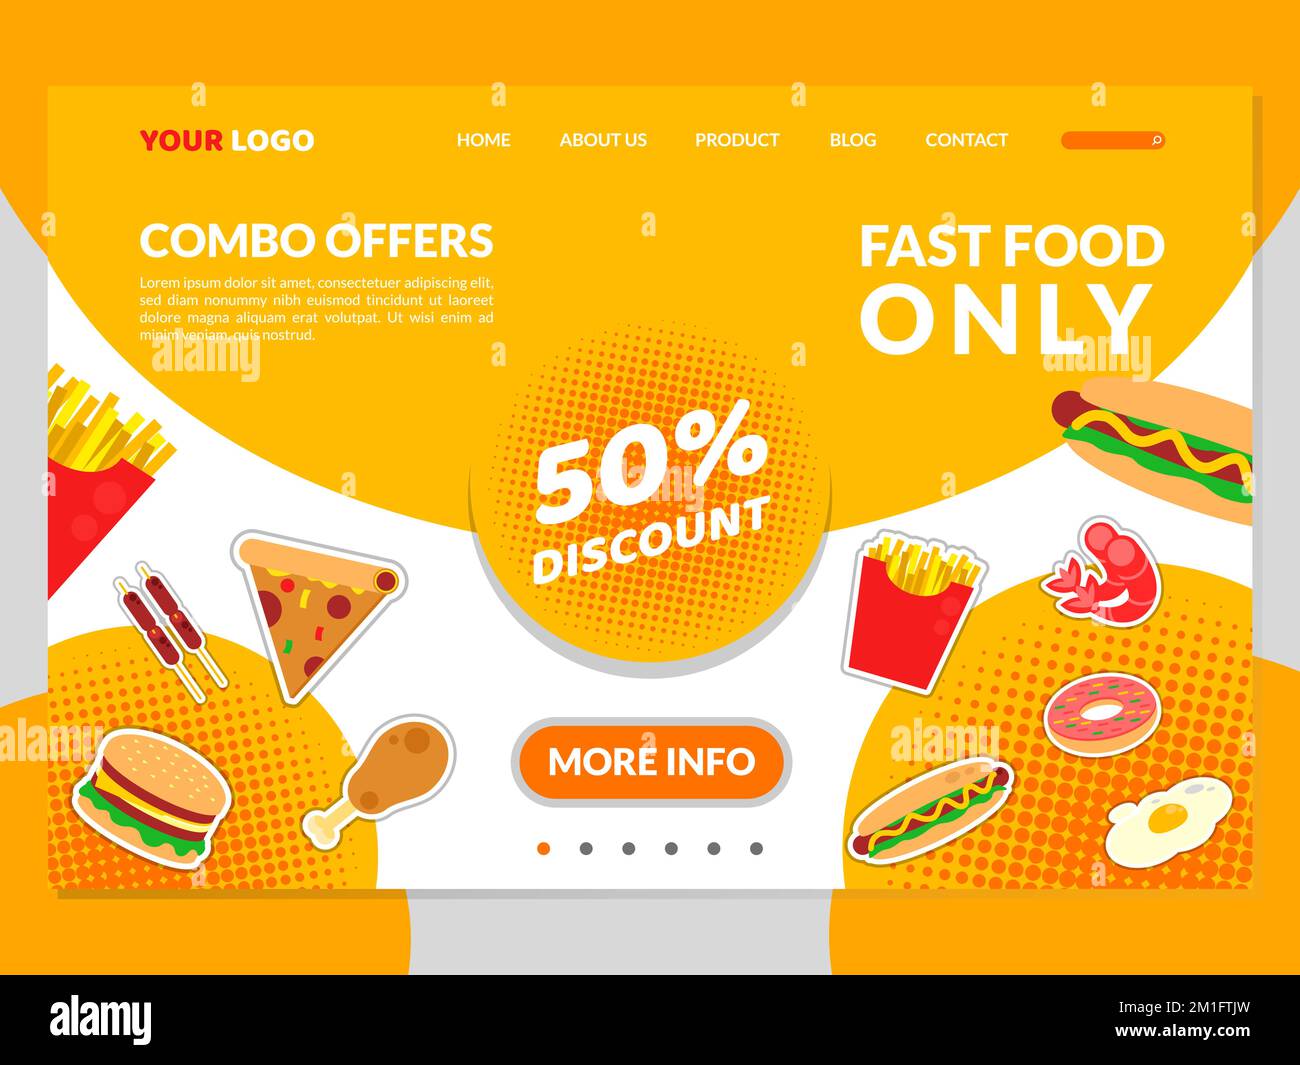 Fast food combo meal advertisement Stock Vector Images - Alamy